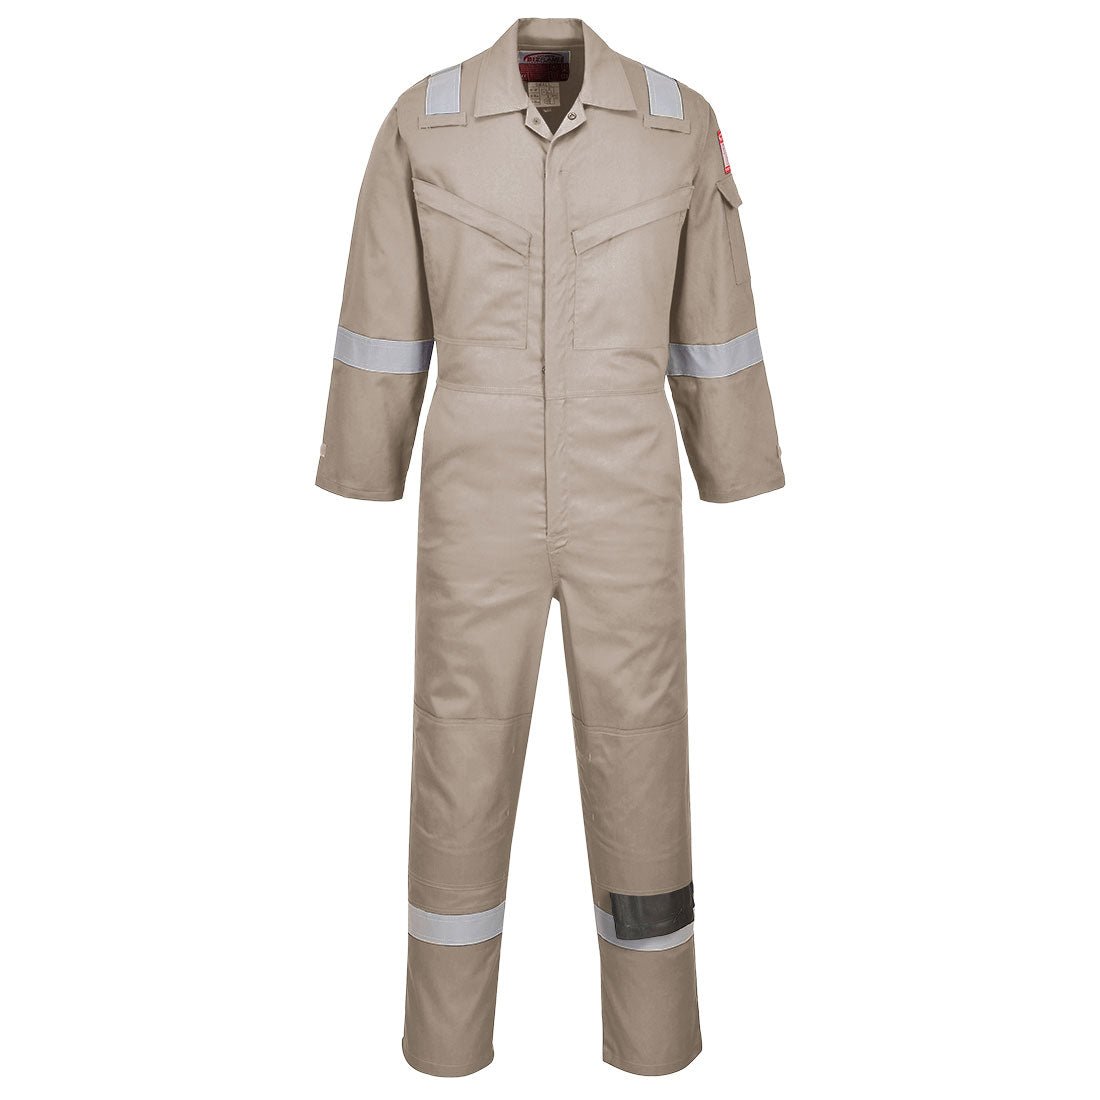 Flame Resistant Super Light Weight Anti-Static Coverall 210g - arbeitskleidung-gmbh